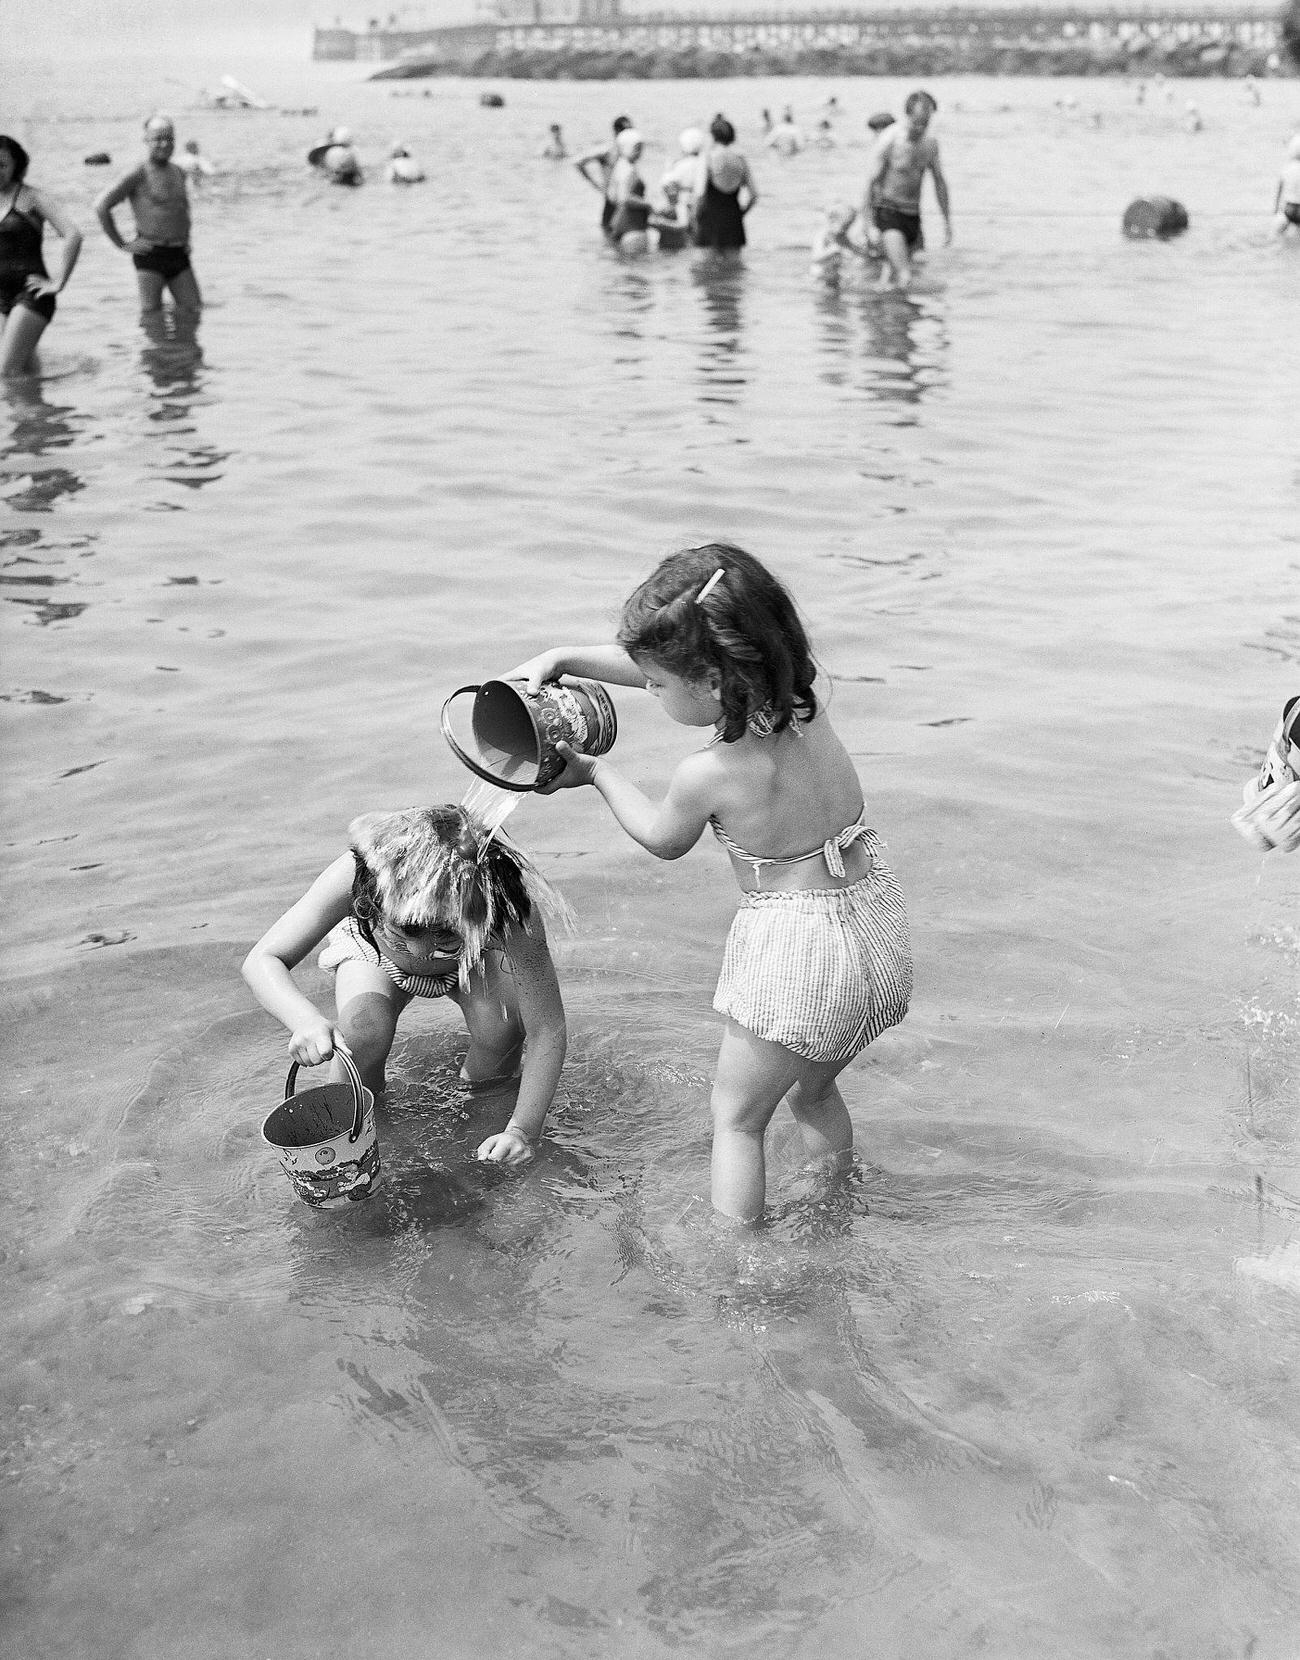 Children Cooling Off In Coney Island Waters, 1946